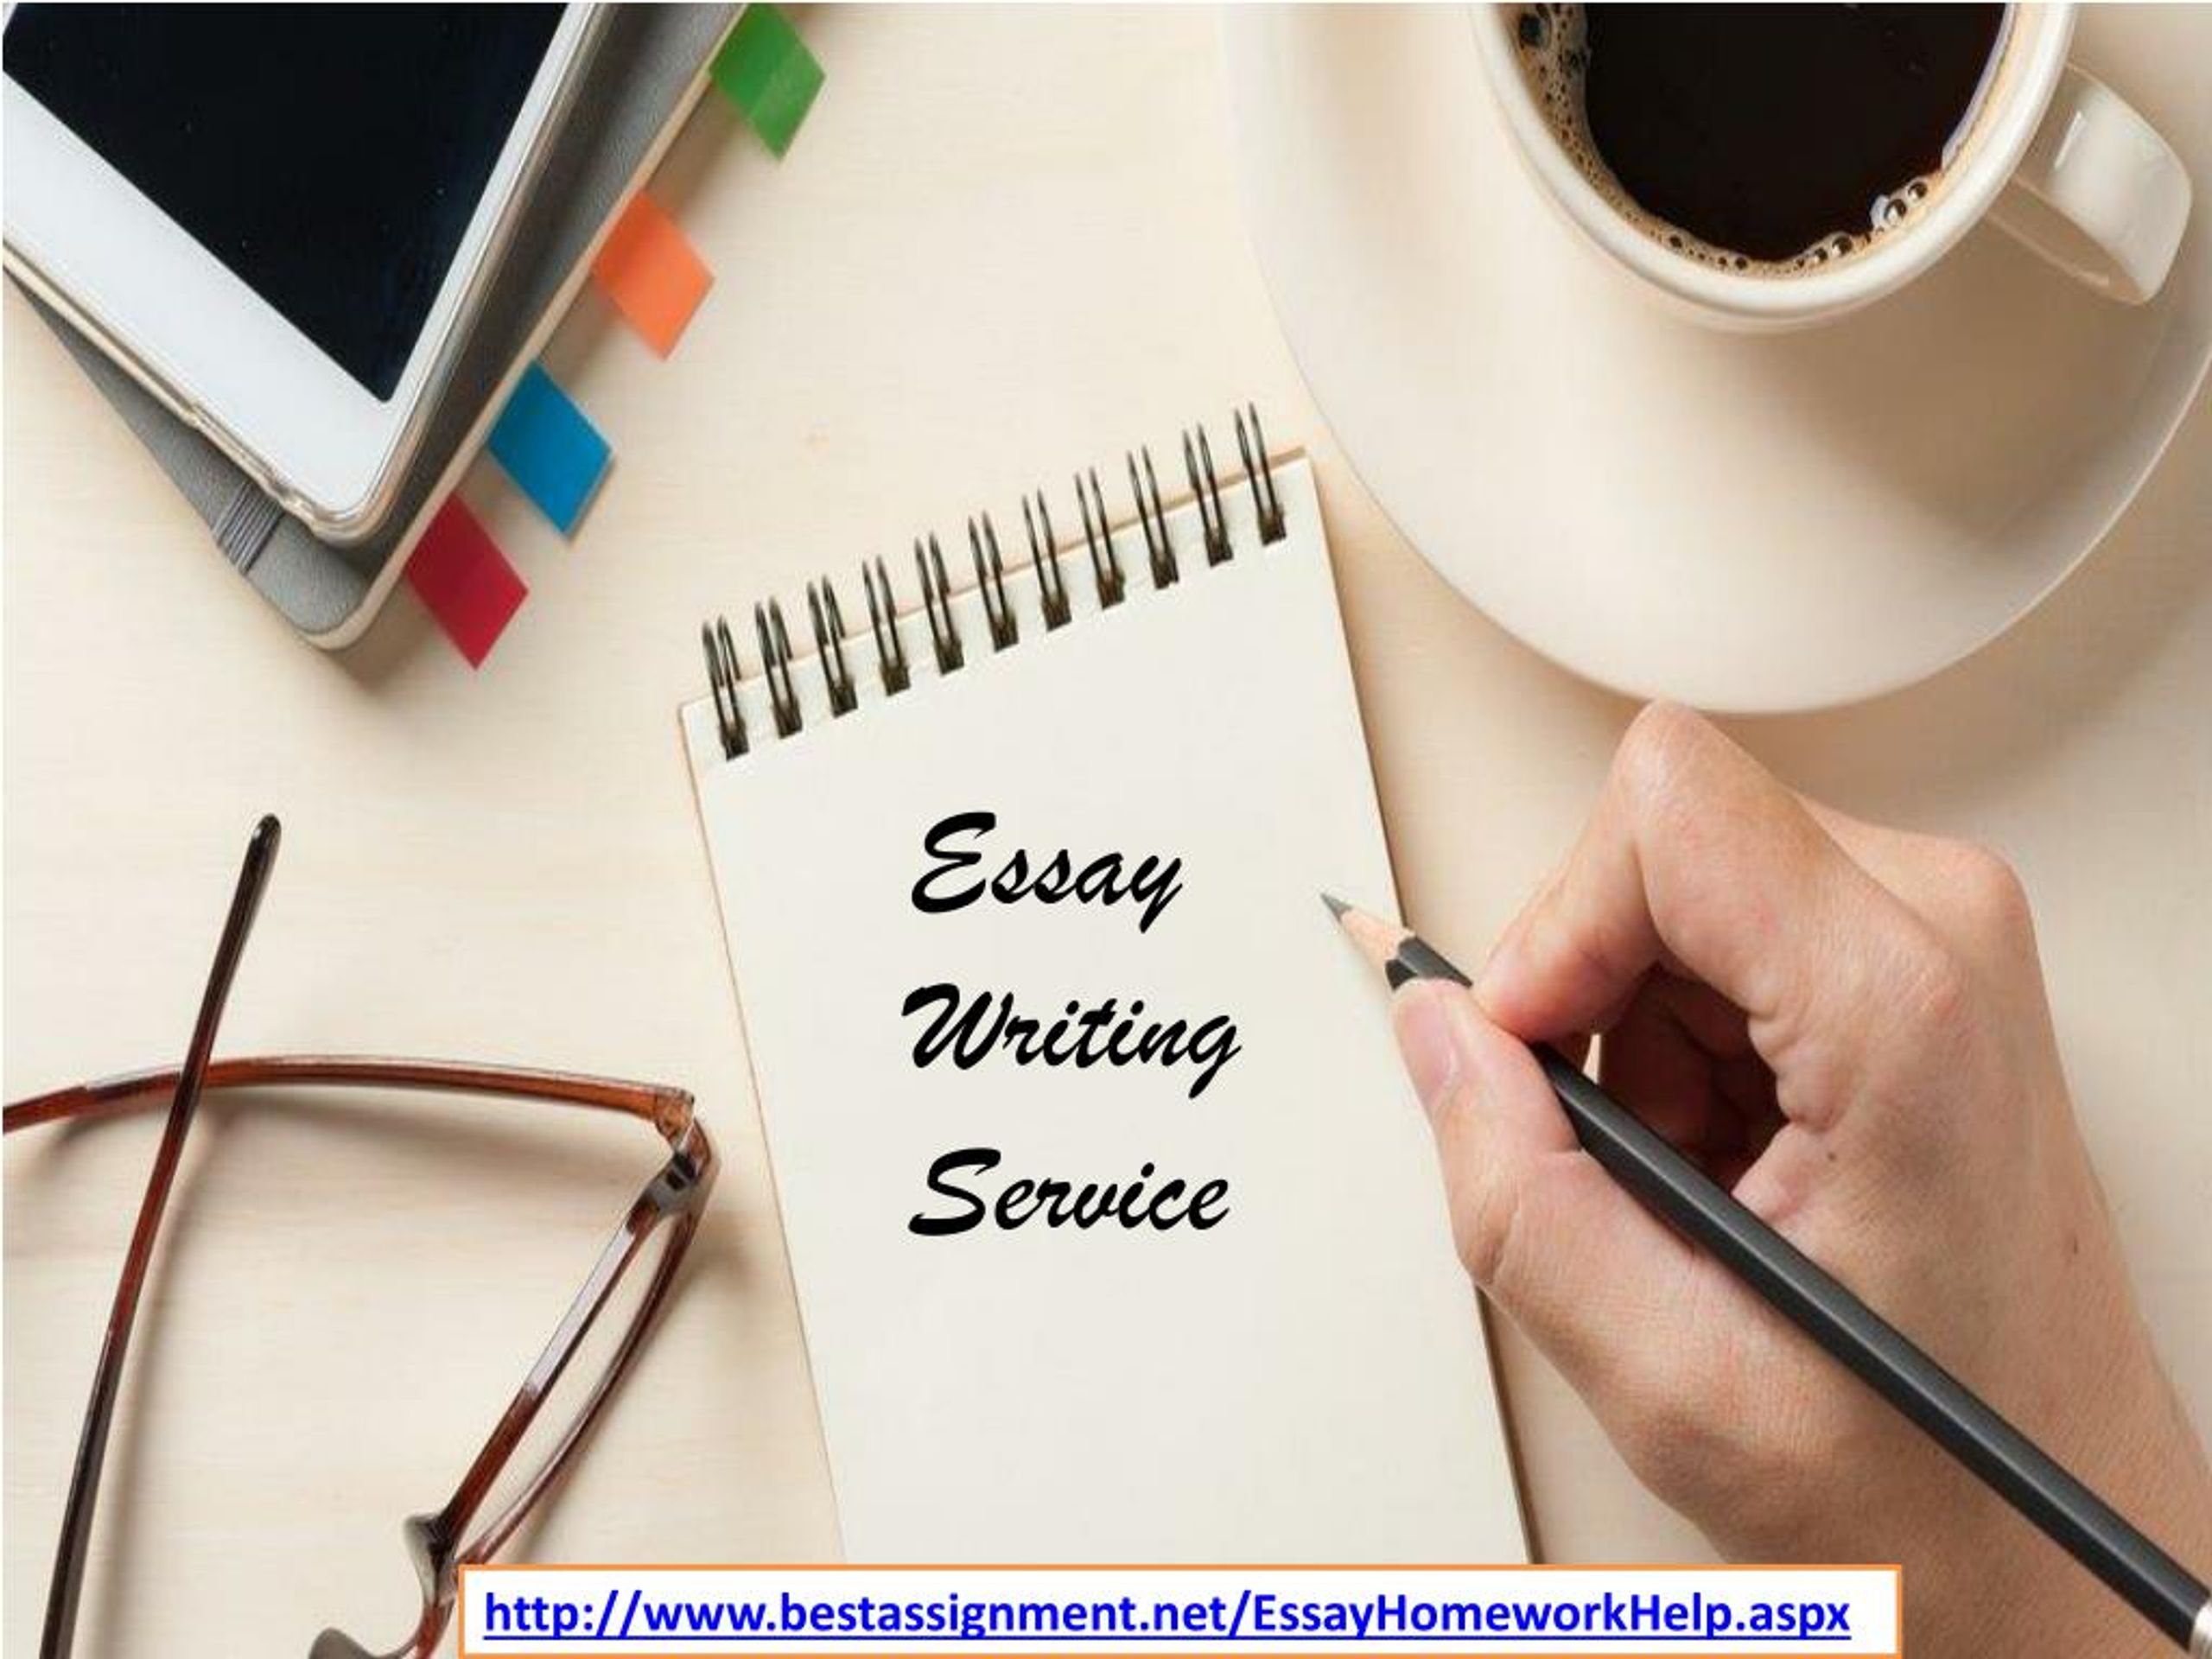 essay paper writing services